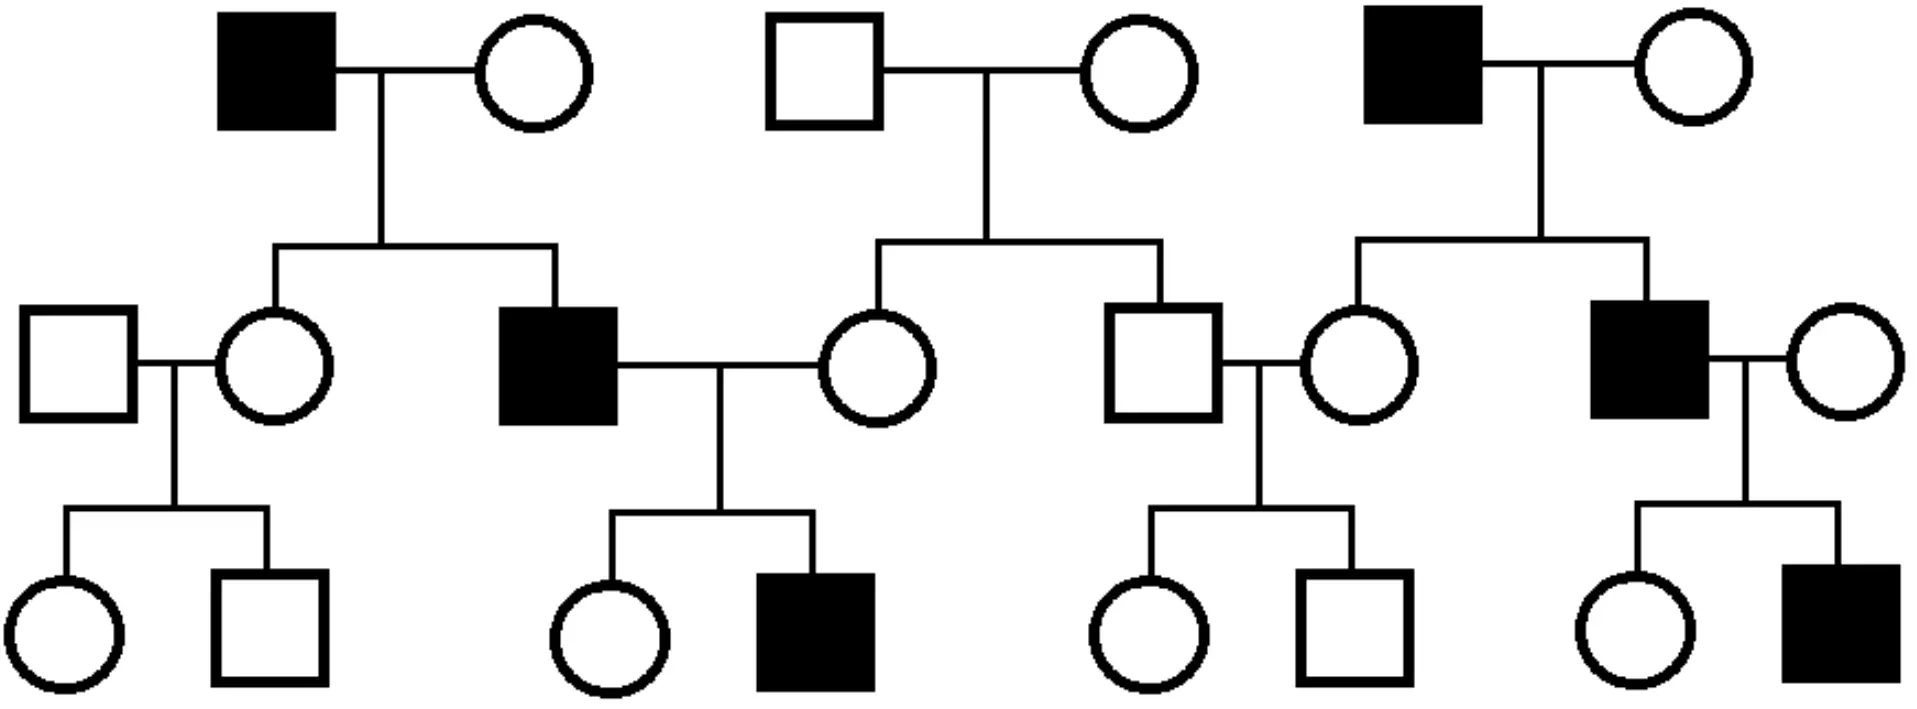 Y-Linked Pedigree Chart SimpleMed